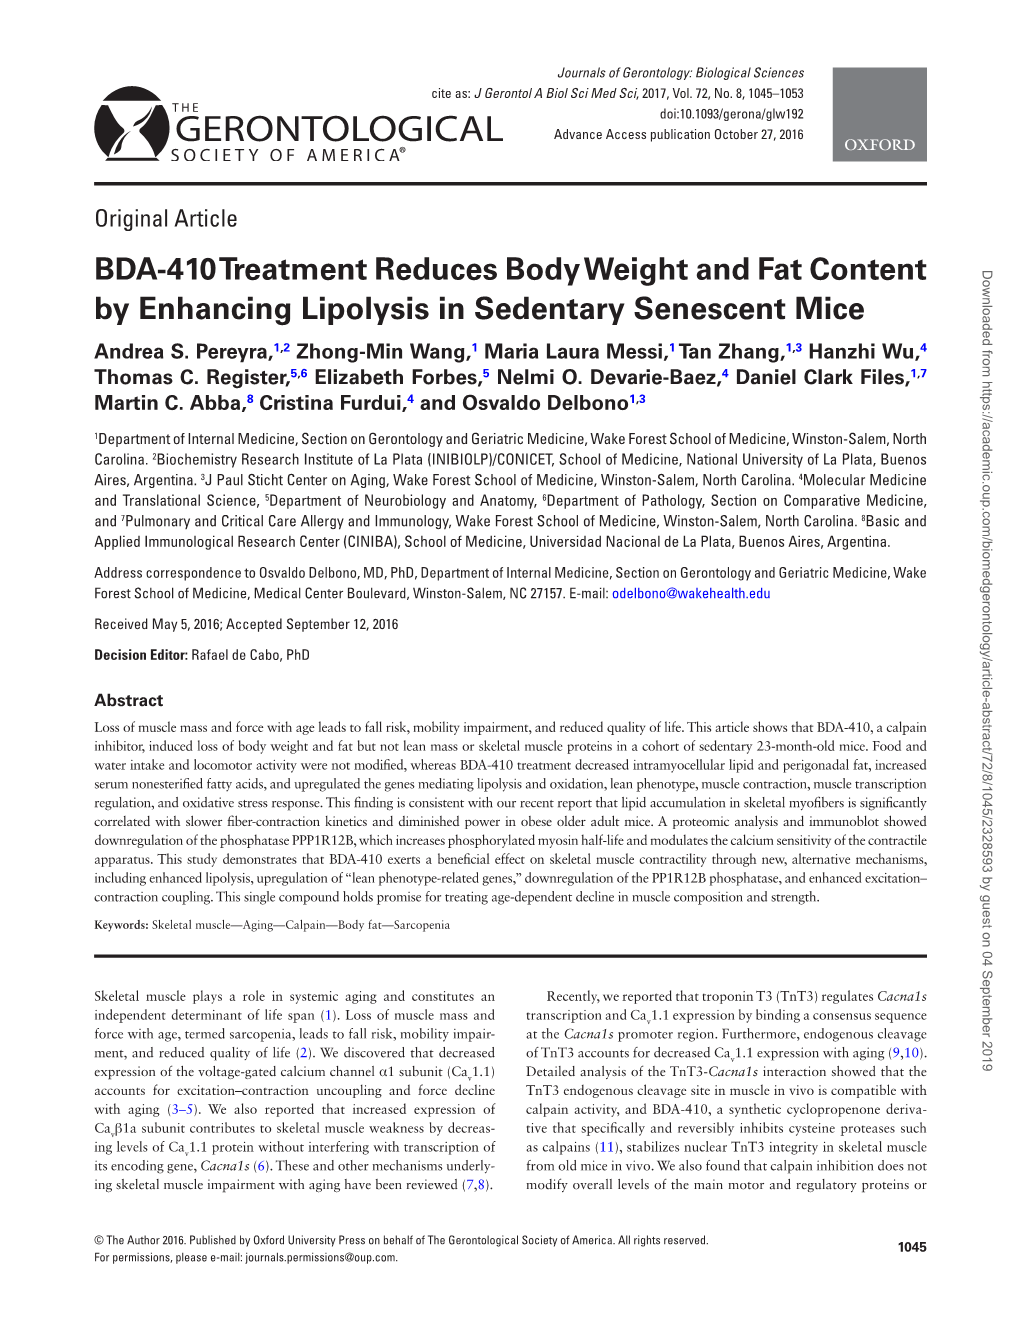 BDA-410 Treatment Reduces Body Weight and Fat Content By